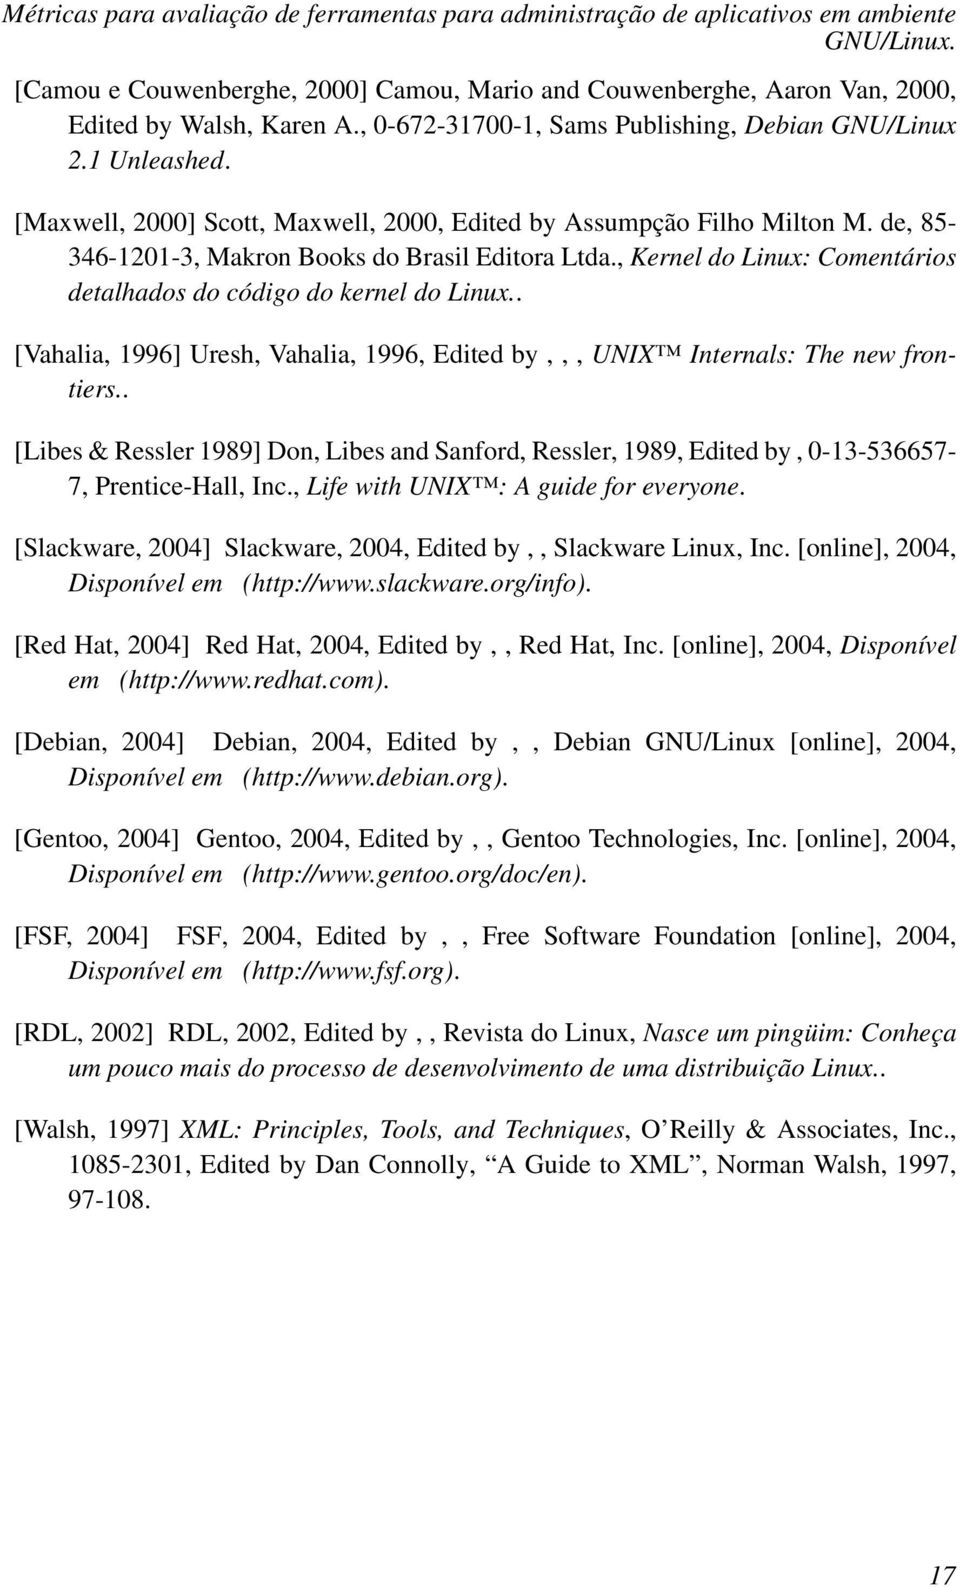 . [Vahalia, 1996] Uresh, Vahalia, 1996, Edited by,,, UNIX Internals: The new frontiers.. [Libes & Ressler 1989] Don, Libes and Sanford, Ressler, 1989, Edited by, 0-13-536657-7, Prentice-Hall, Inc.